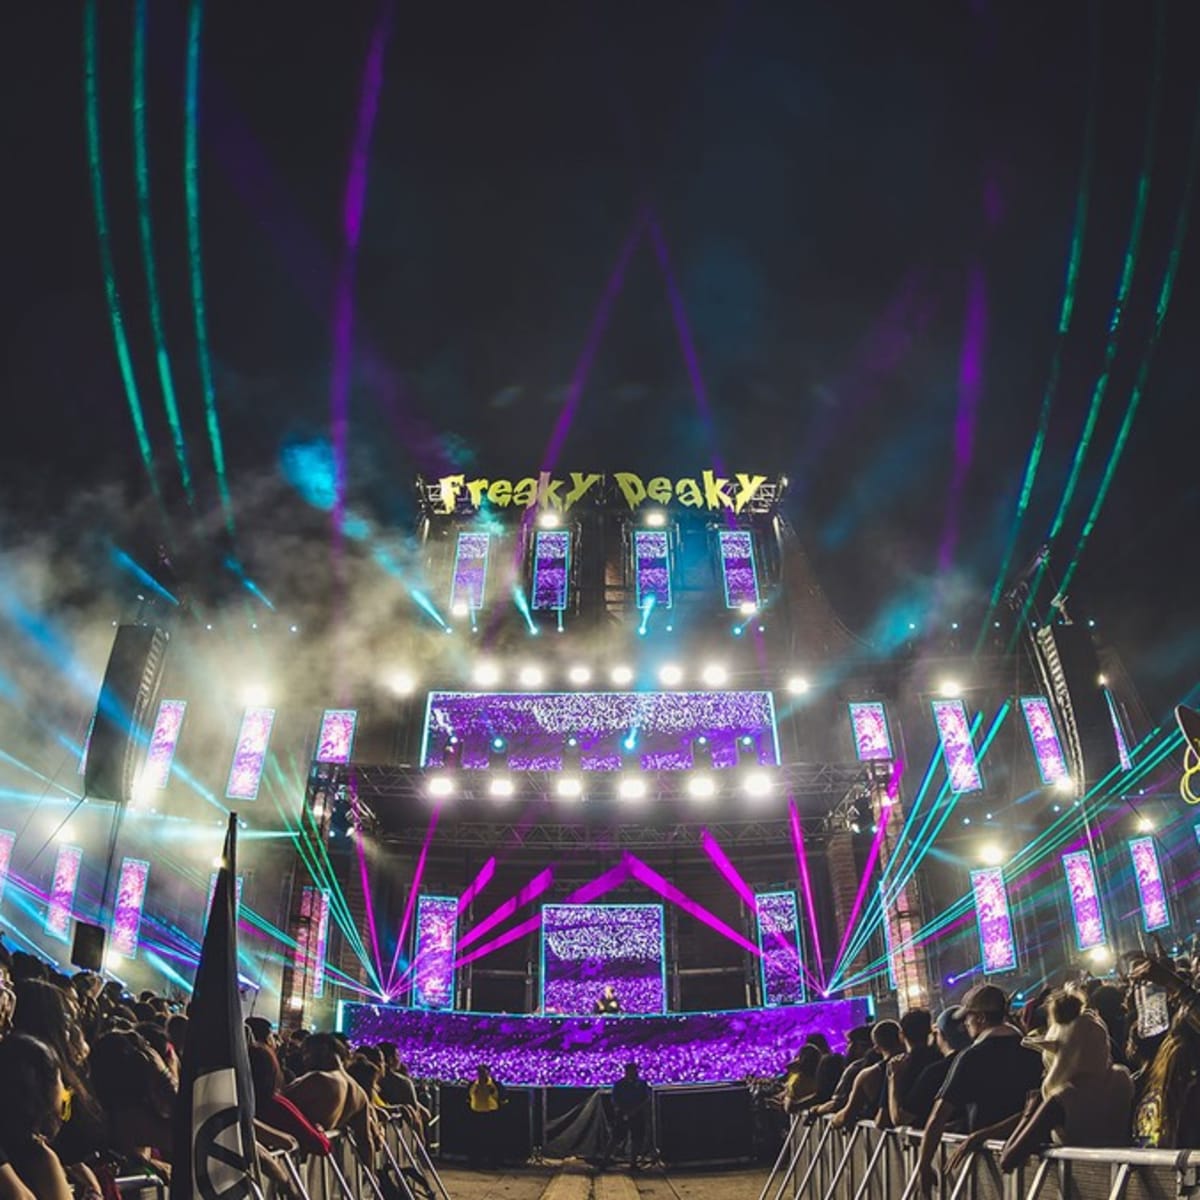 Excision, deadmau5, Kayzo, More Announced for Freaky Deaky Halloween Weekend  Festival  - The Latest Electronic Dance Music News, Reviews &  Artists